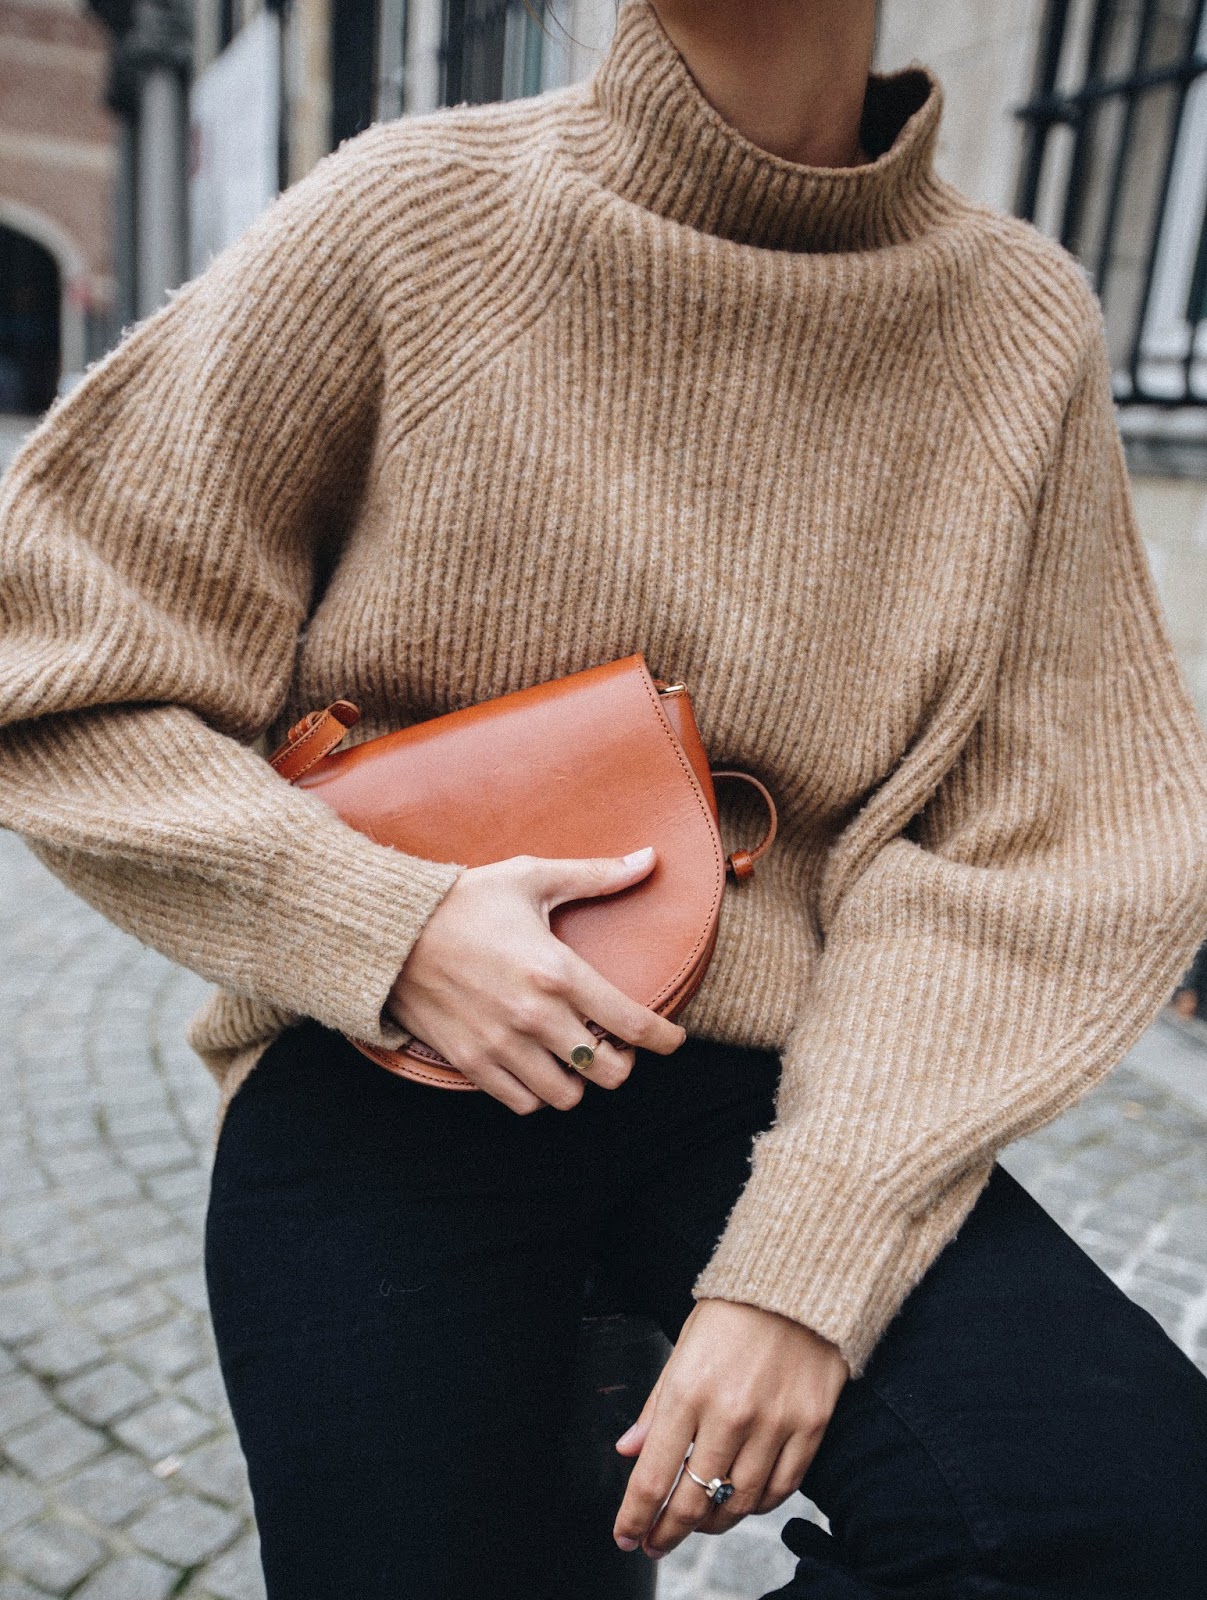 25 of the Most Stylish Sweaters From the Shopbop Sale